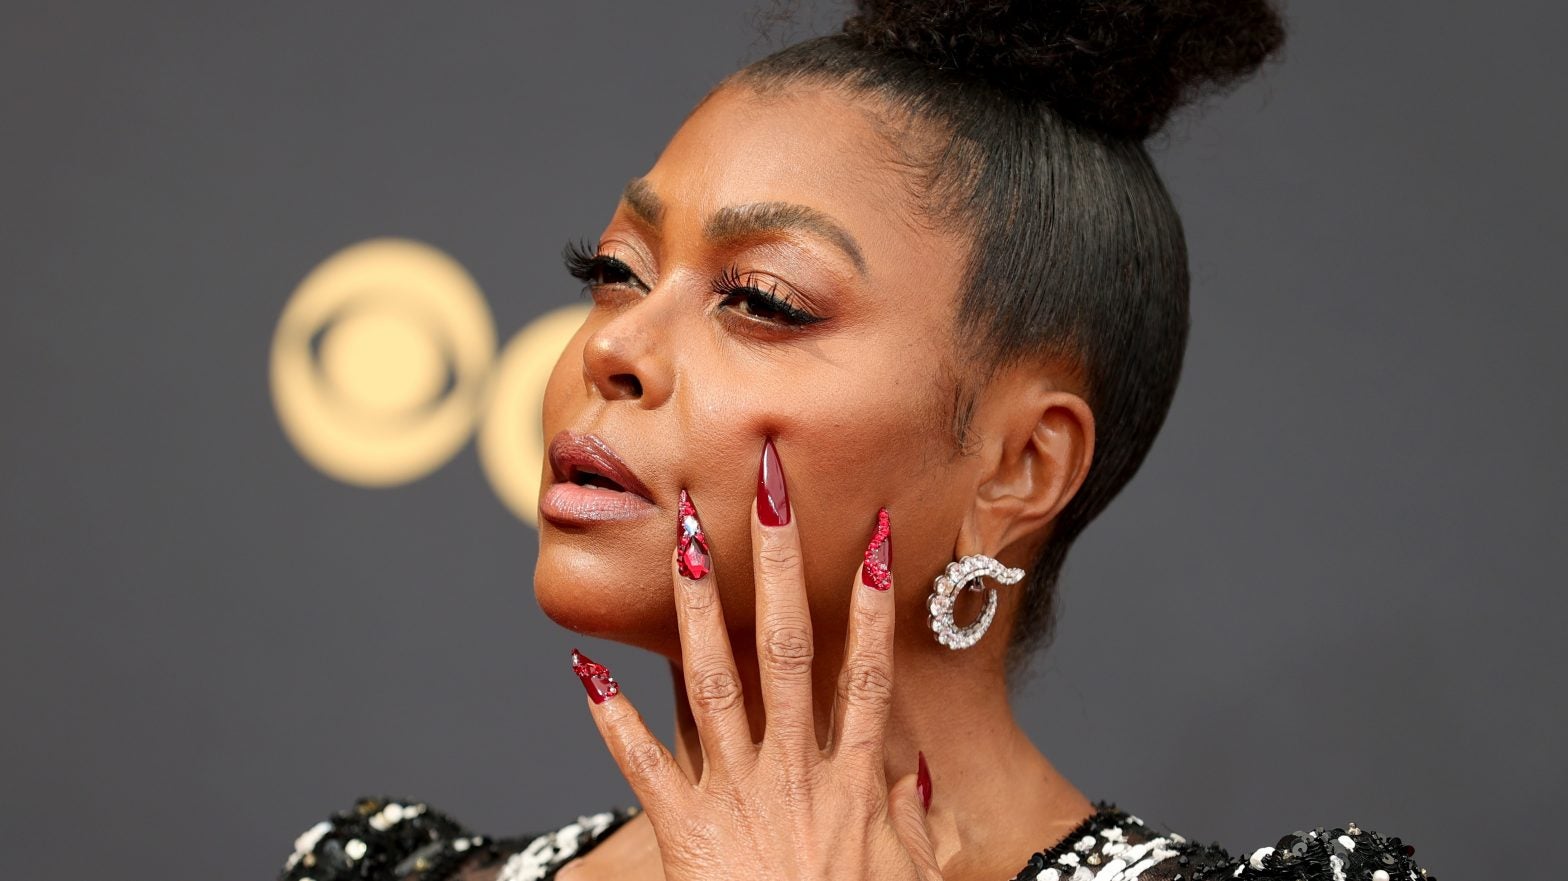 Nailed It! Celebrities With Lovely Long Nails At The 73rd Annual Emmy Awards